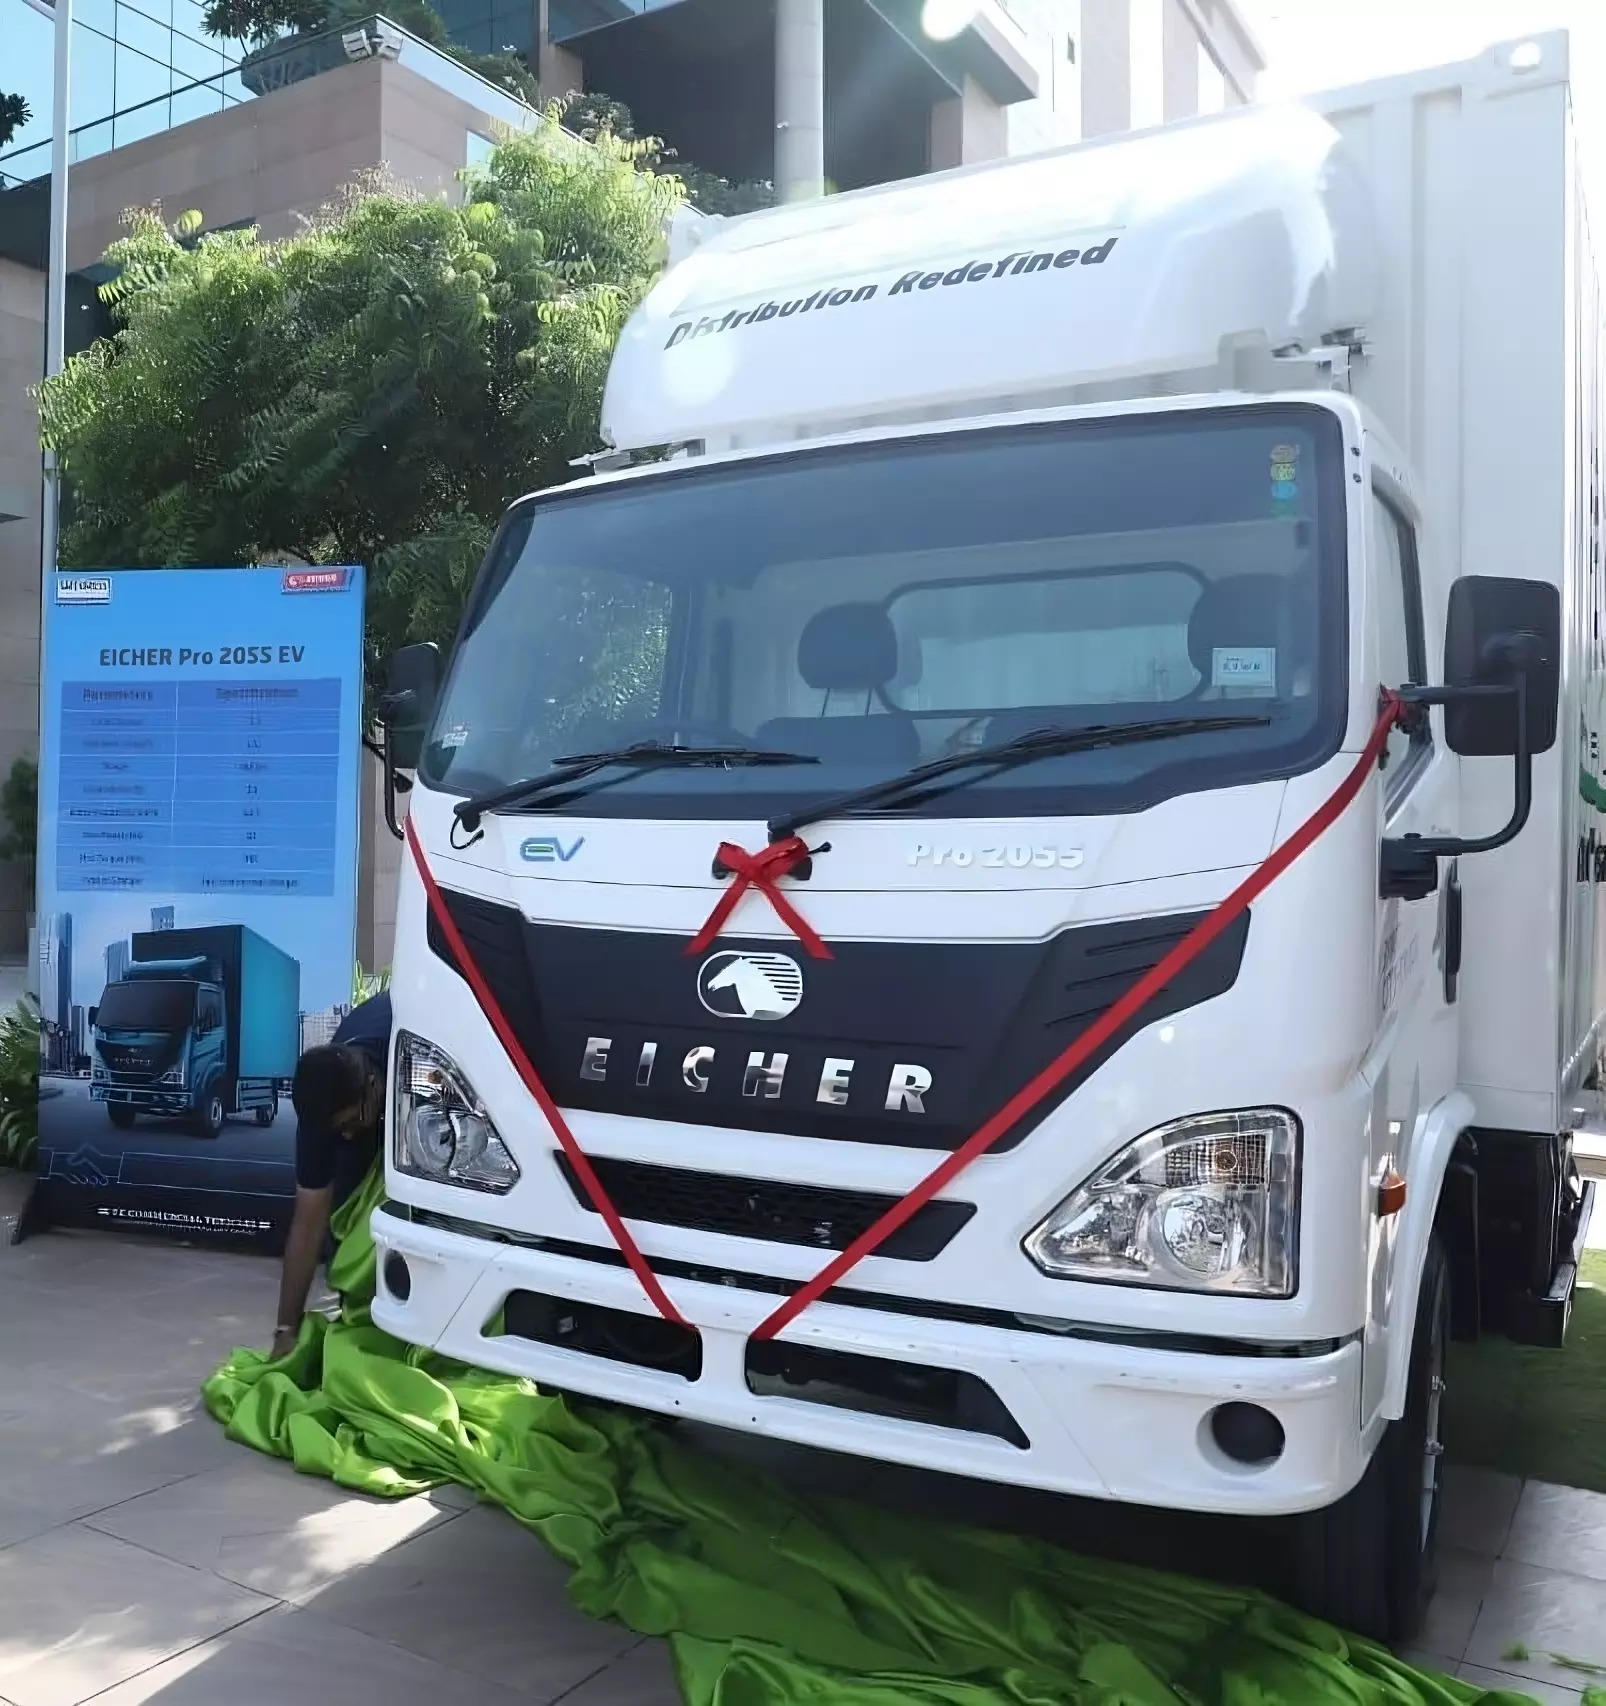 <p>Eicher Pro 2055 EV will be built on Eicher's established electric vehicle technology already in use in intra-city bus applications. It has a deck length of 12ft and will come equipped with two fully built container solutions. </p>